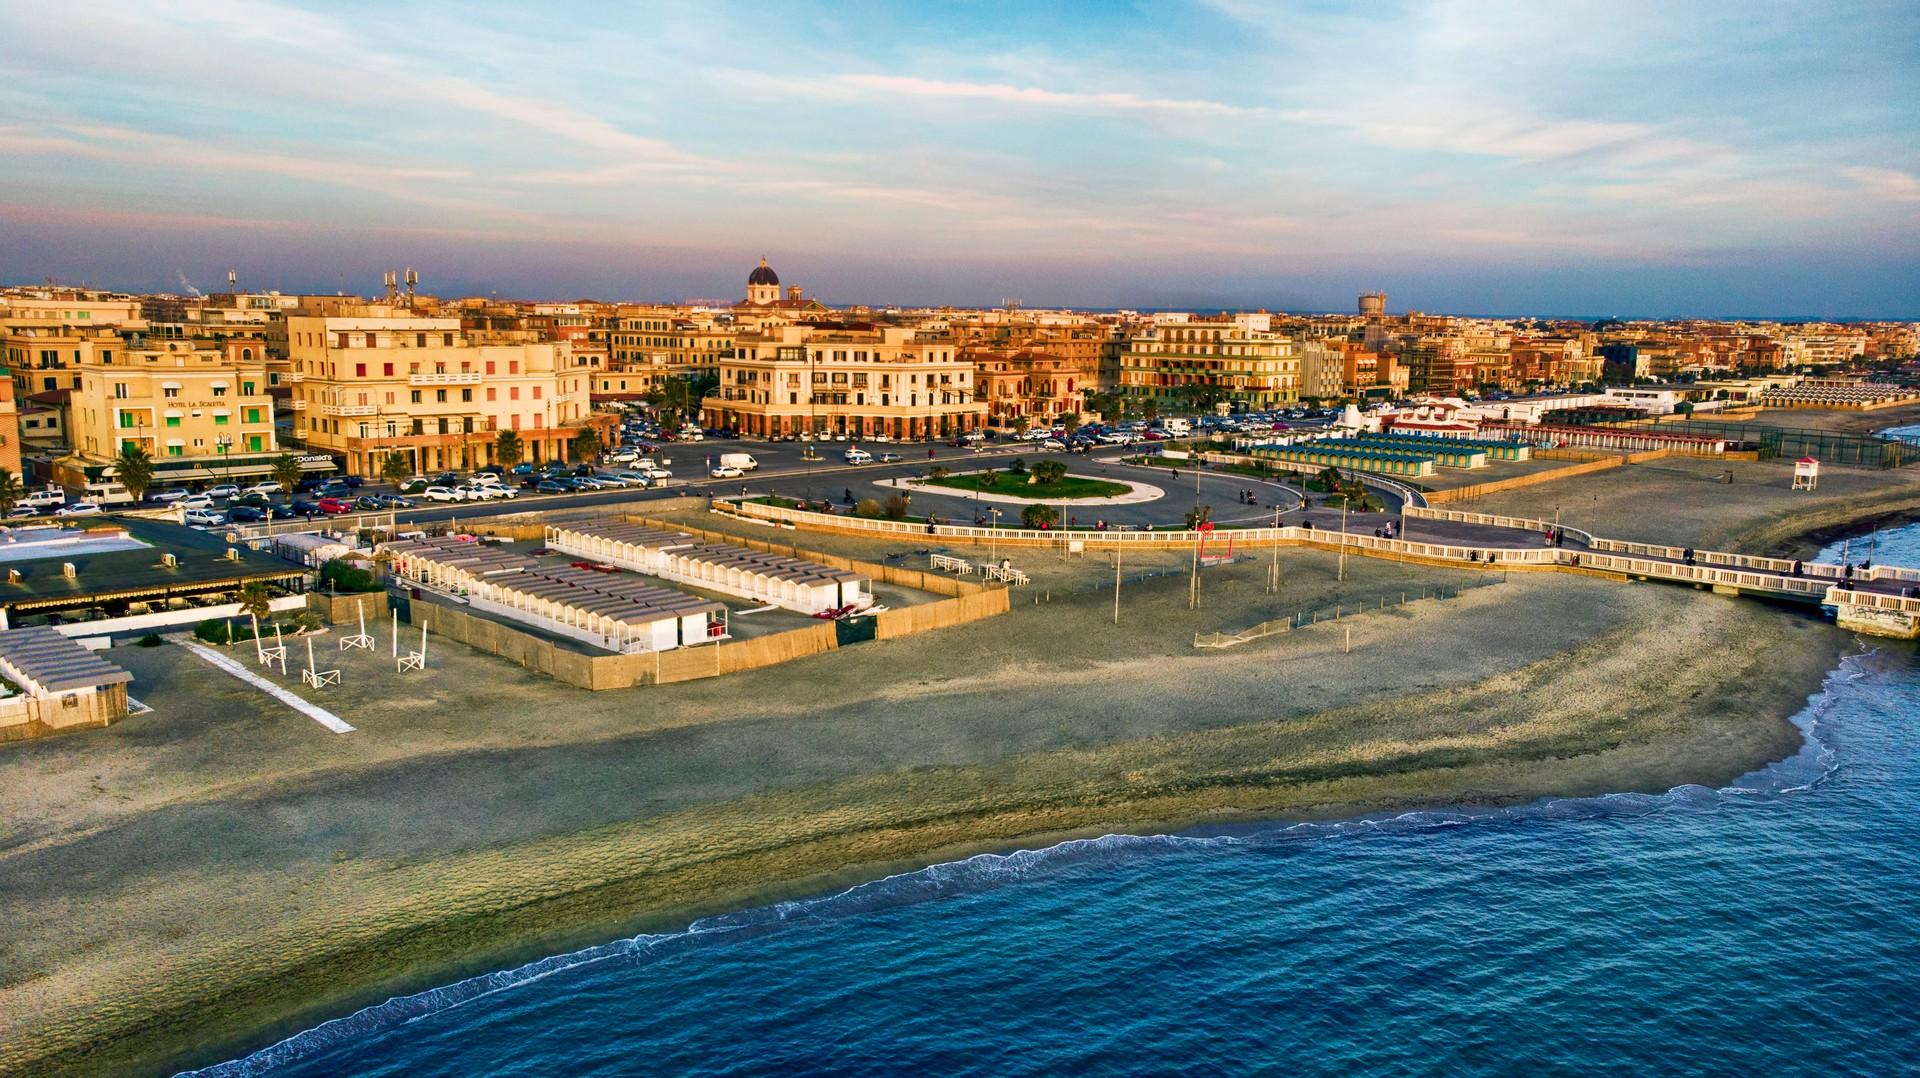 Aerial view of port in Lido di Ostia at sunset time